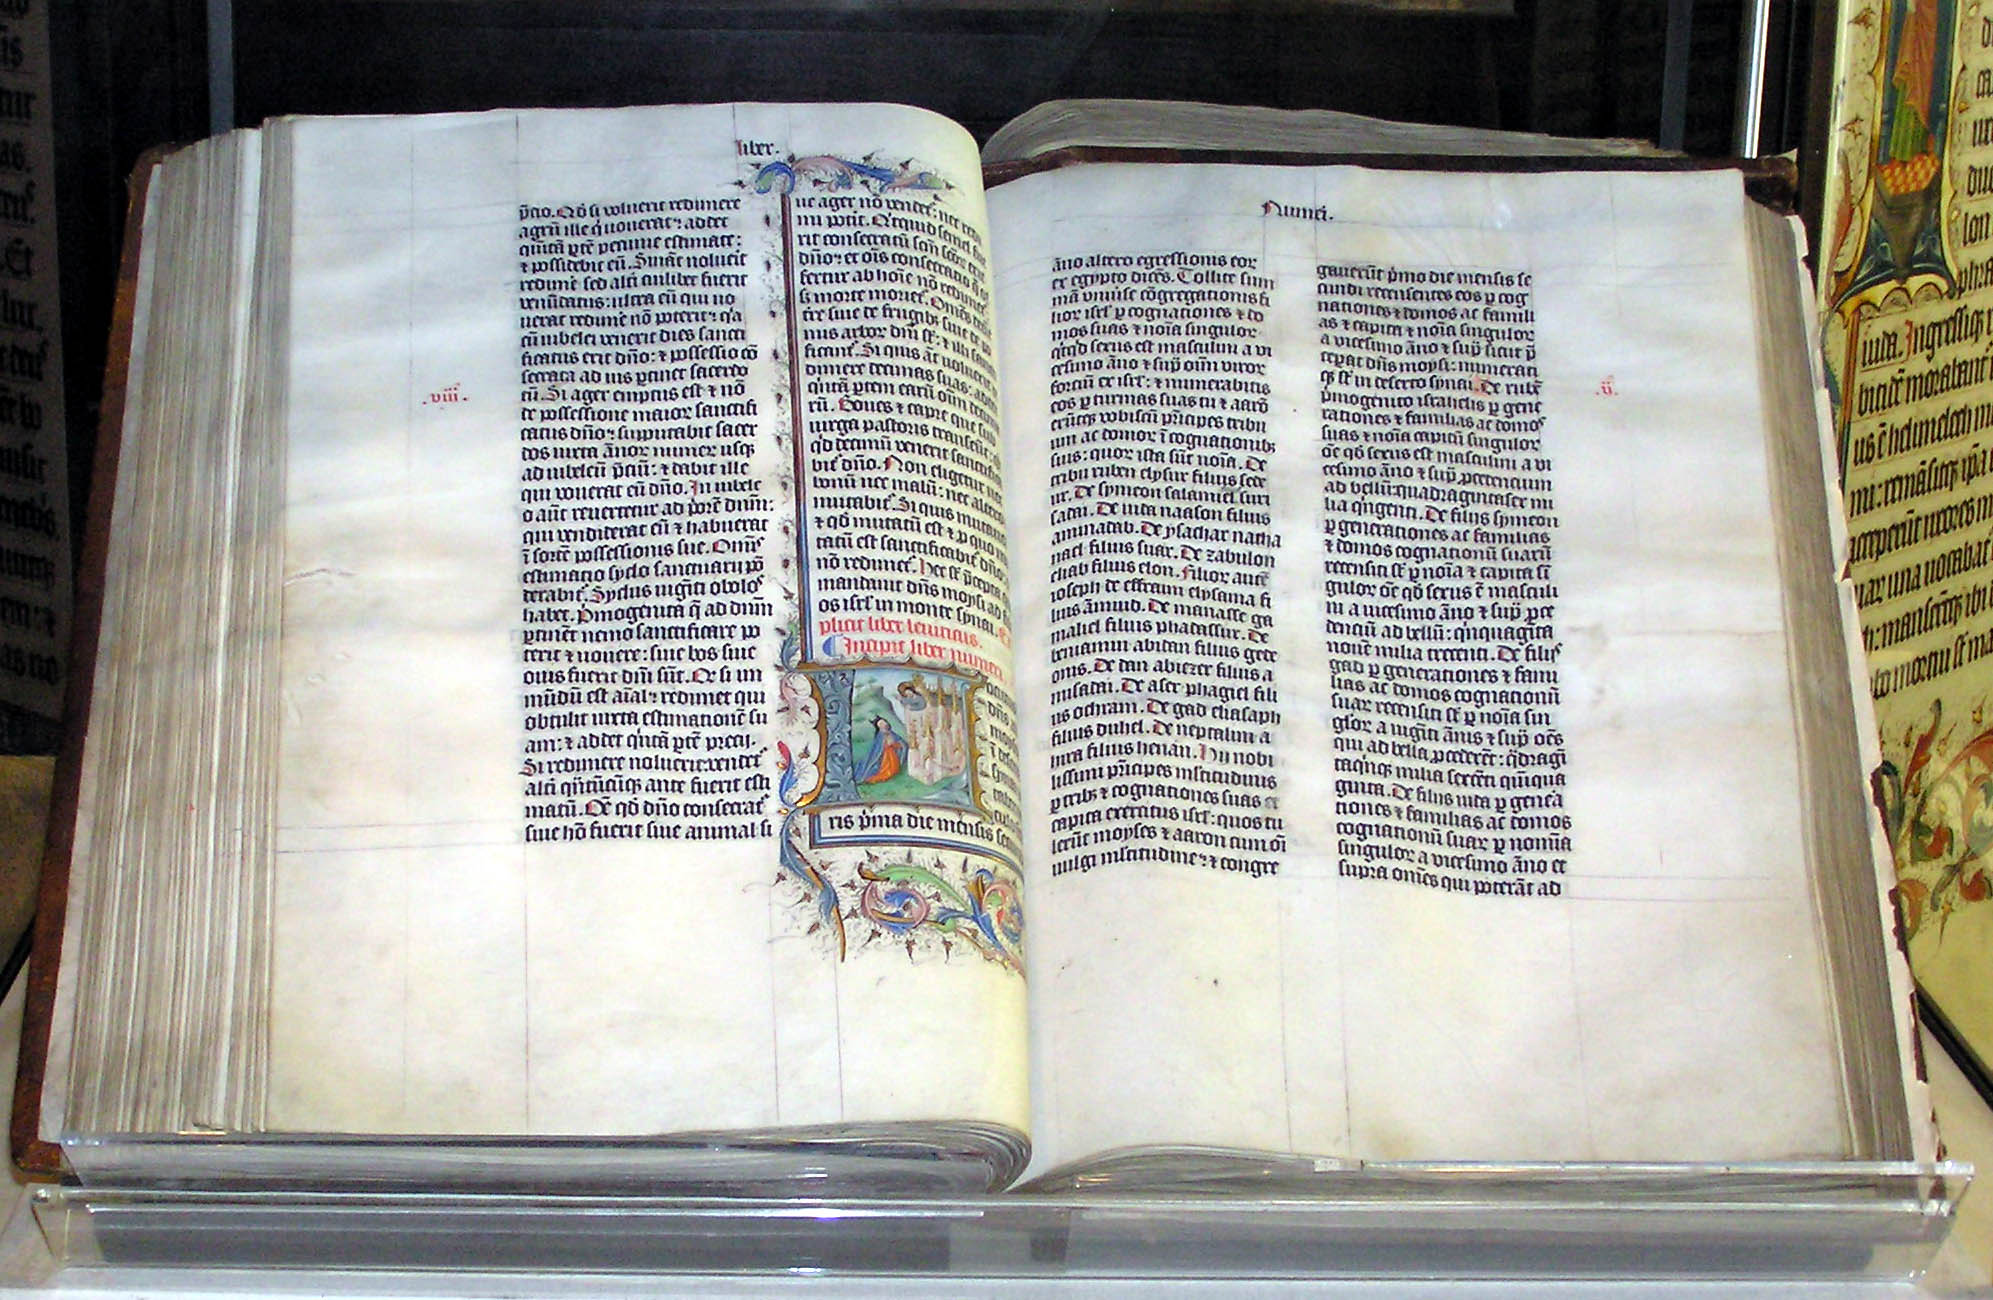 what does septuagint mean and where does the word septuagint come from